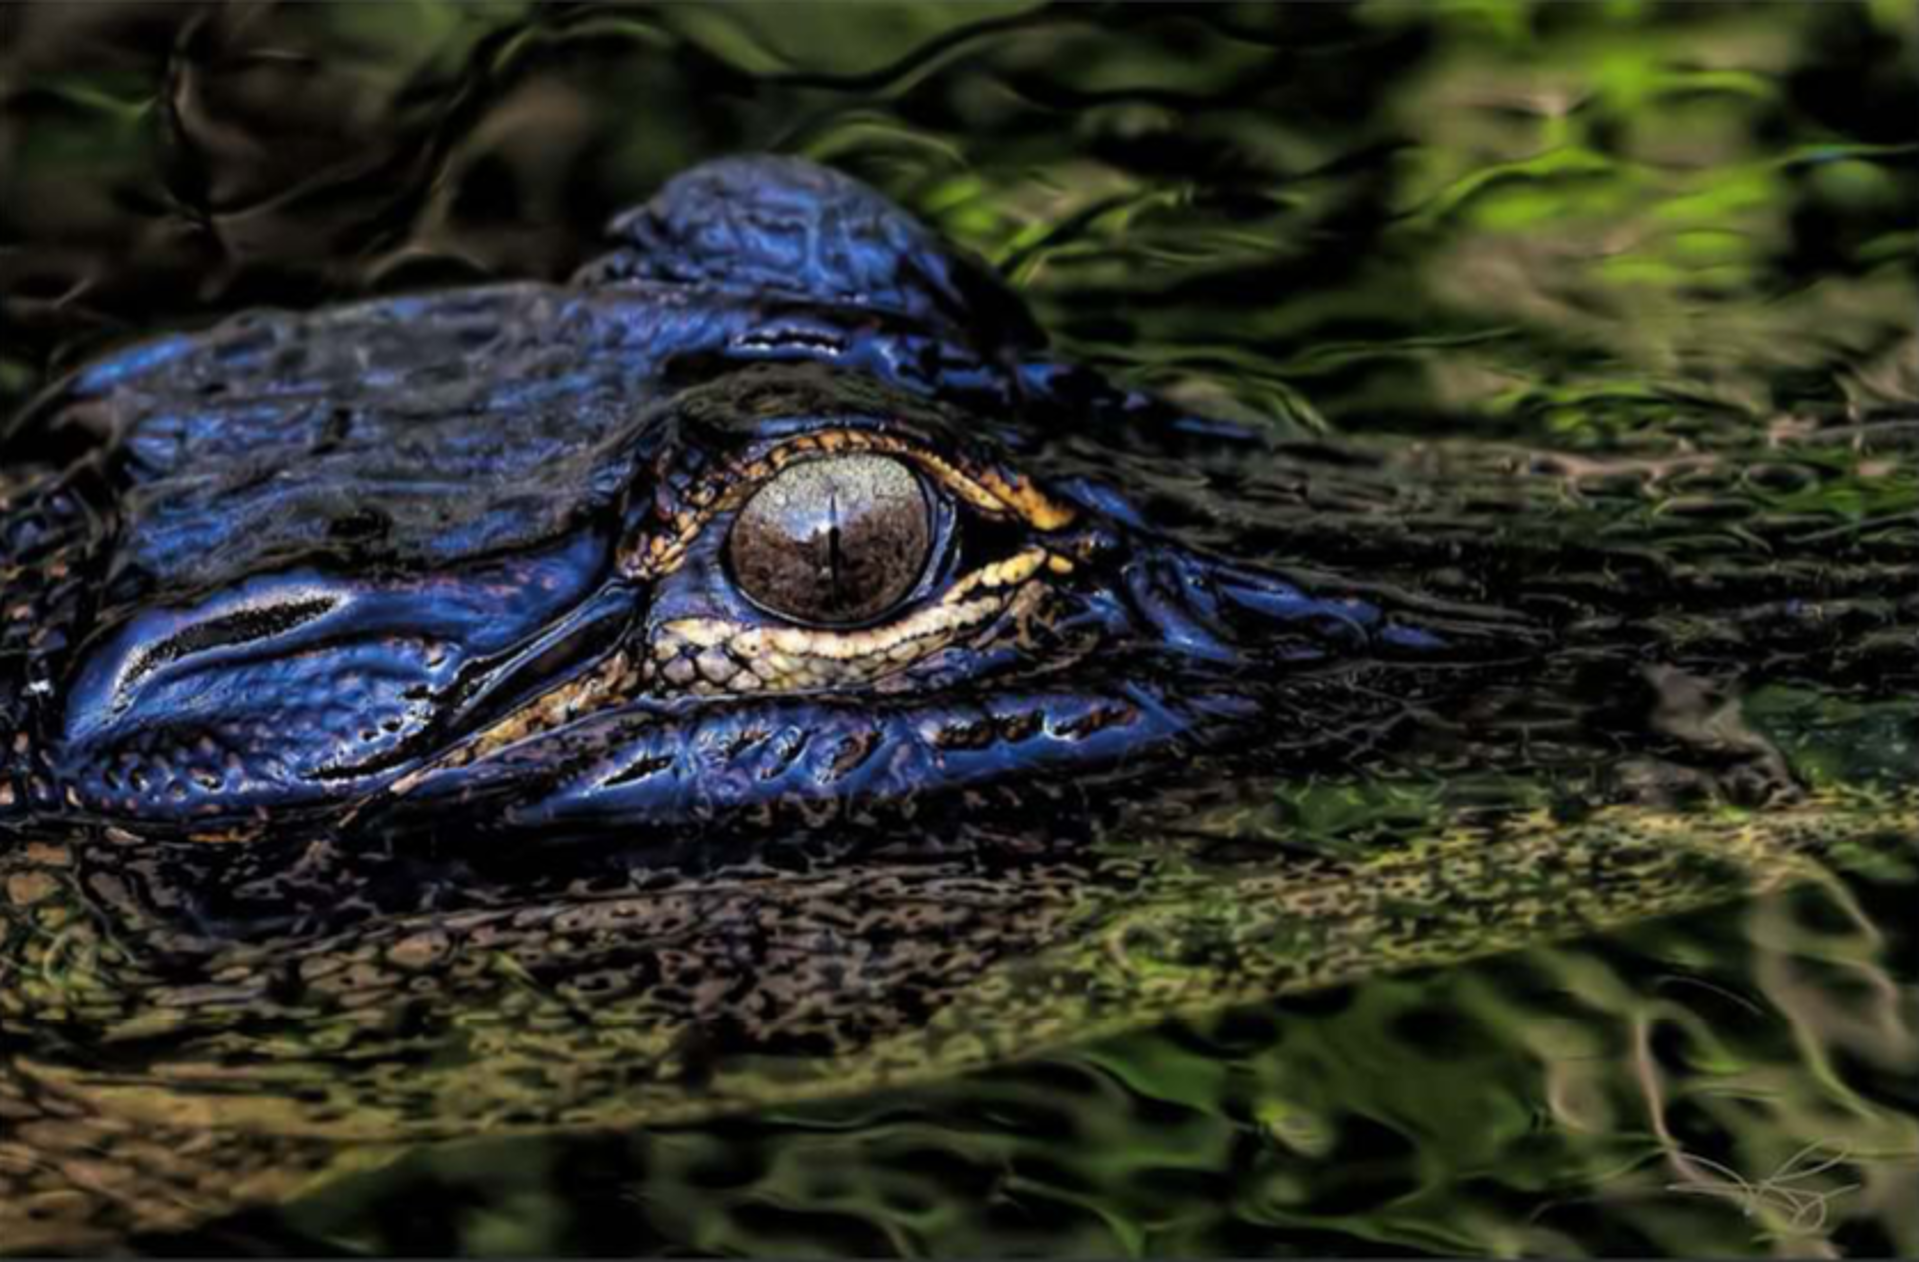 Eye of the Gator by Mike Ramy